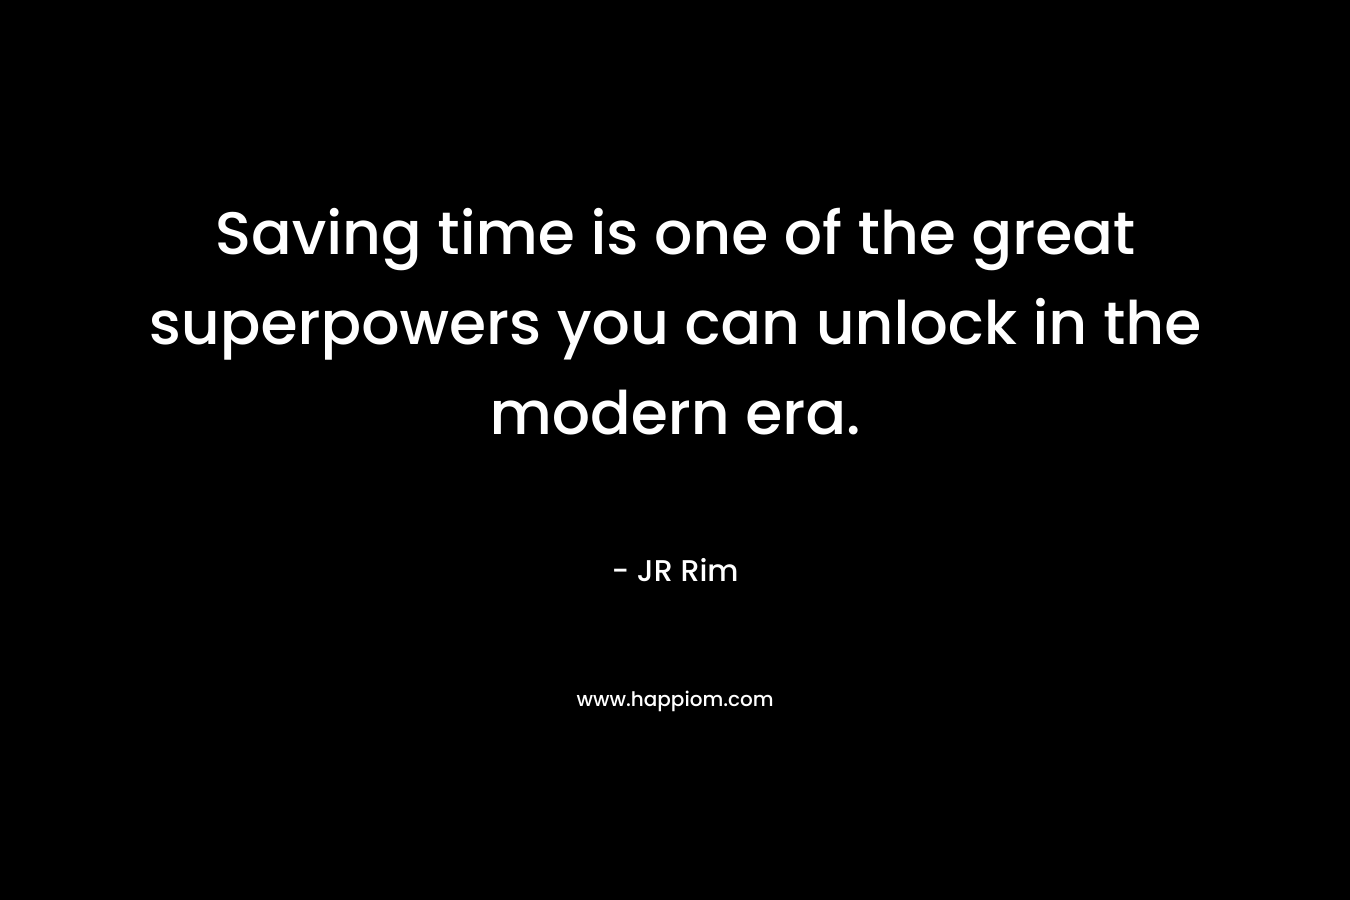 Saving time is one of the great superpowers you can unlock in the modern era. – JR Rim